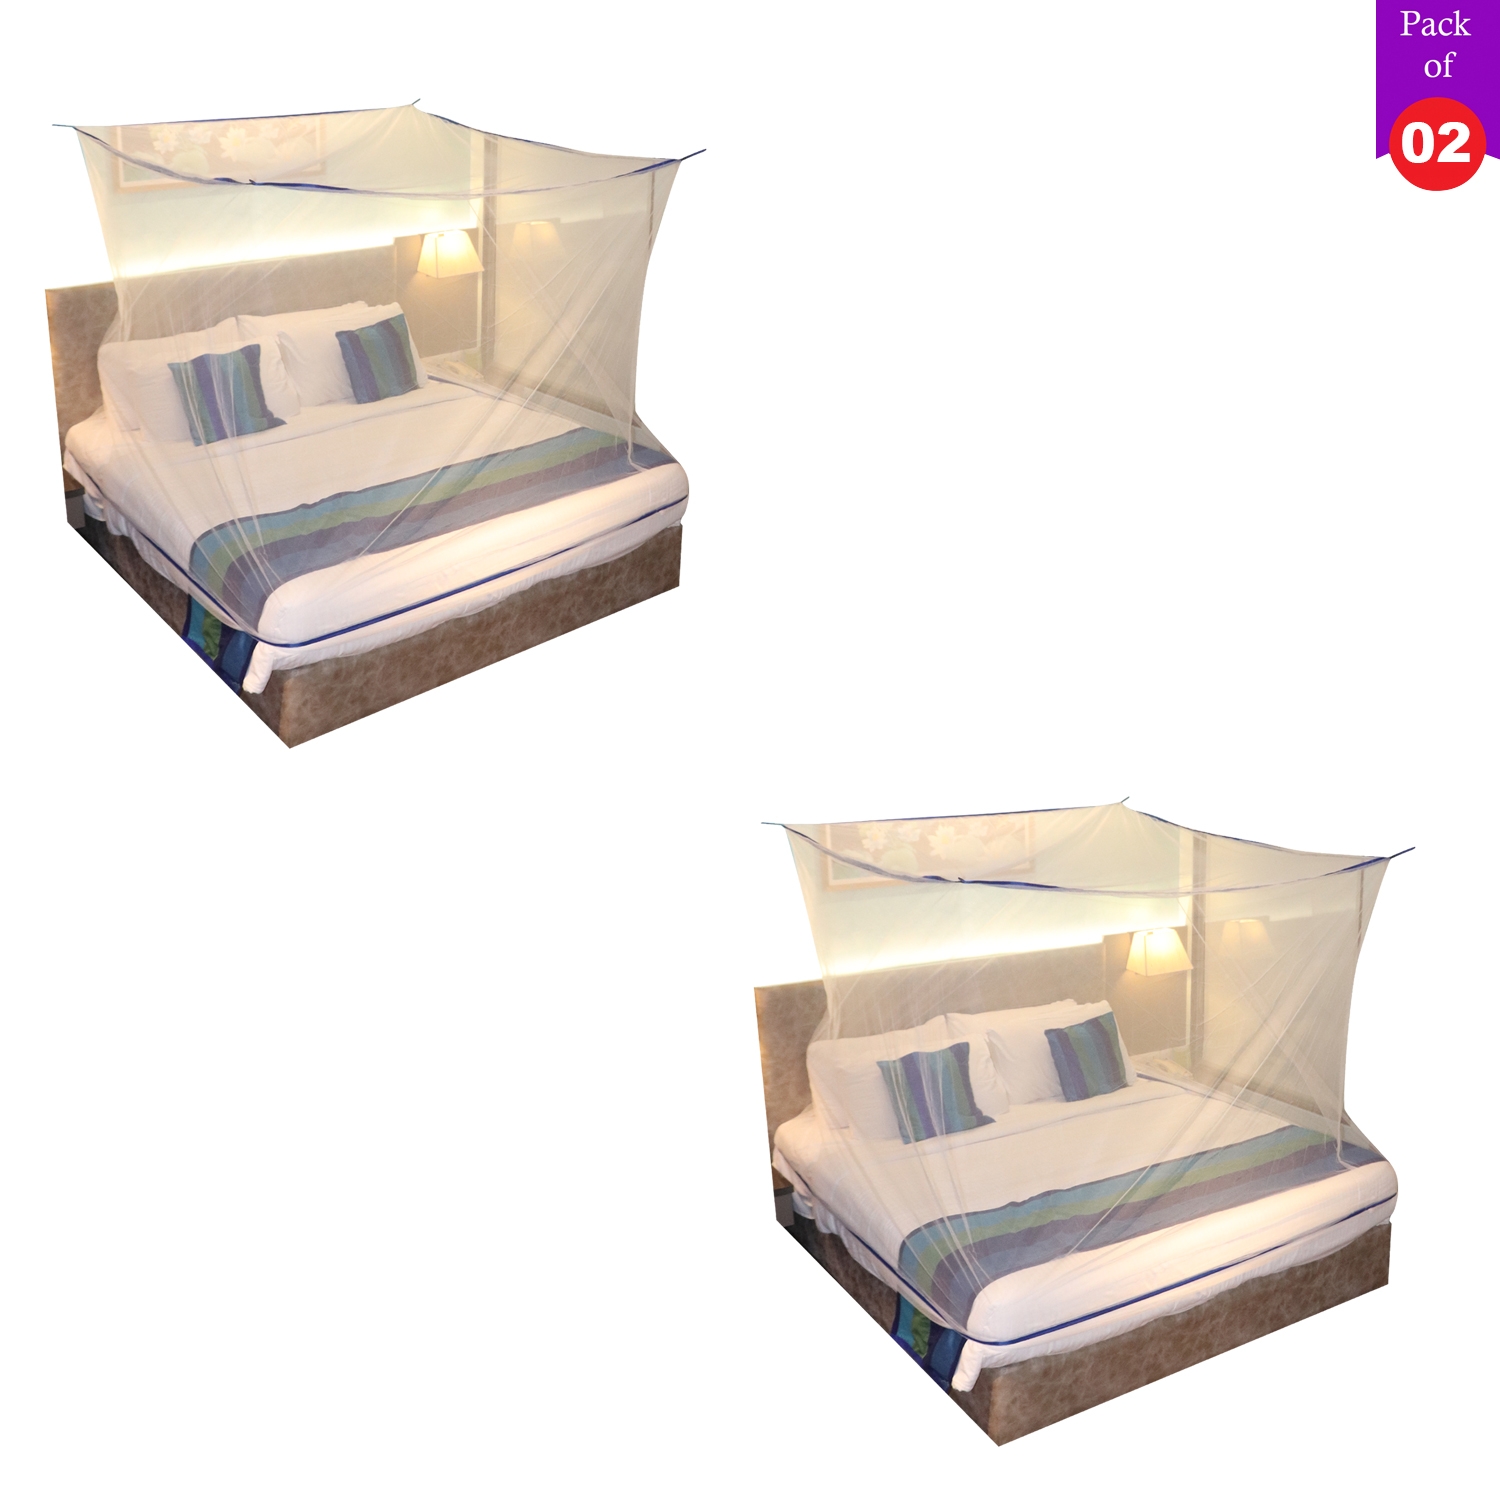 SILVER SHINE | Mosquito Net for Double Bed, King-Size, Square Hanging Foldable Polyester Net White And BluePack of 2 2